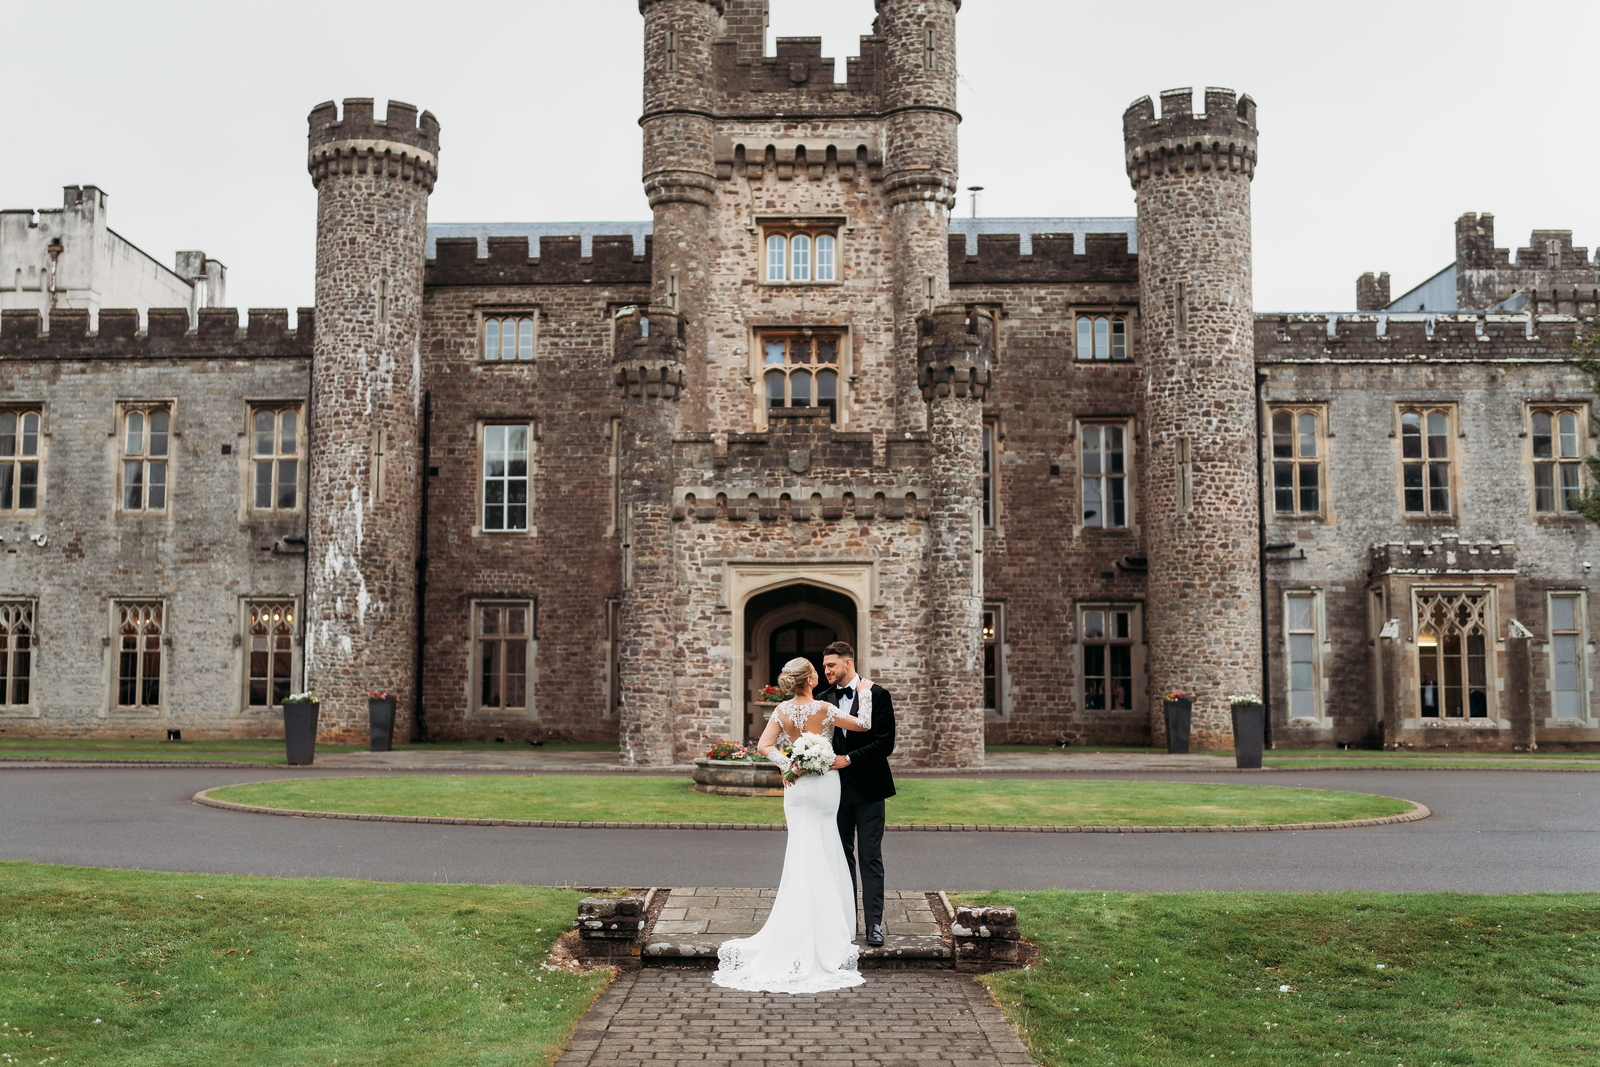 Couple in front of castle